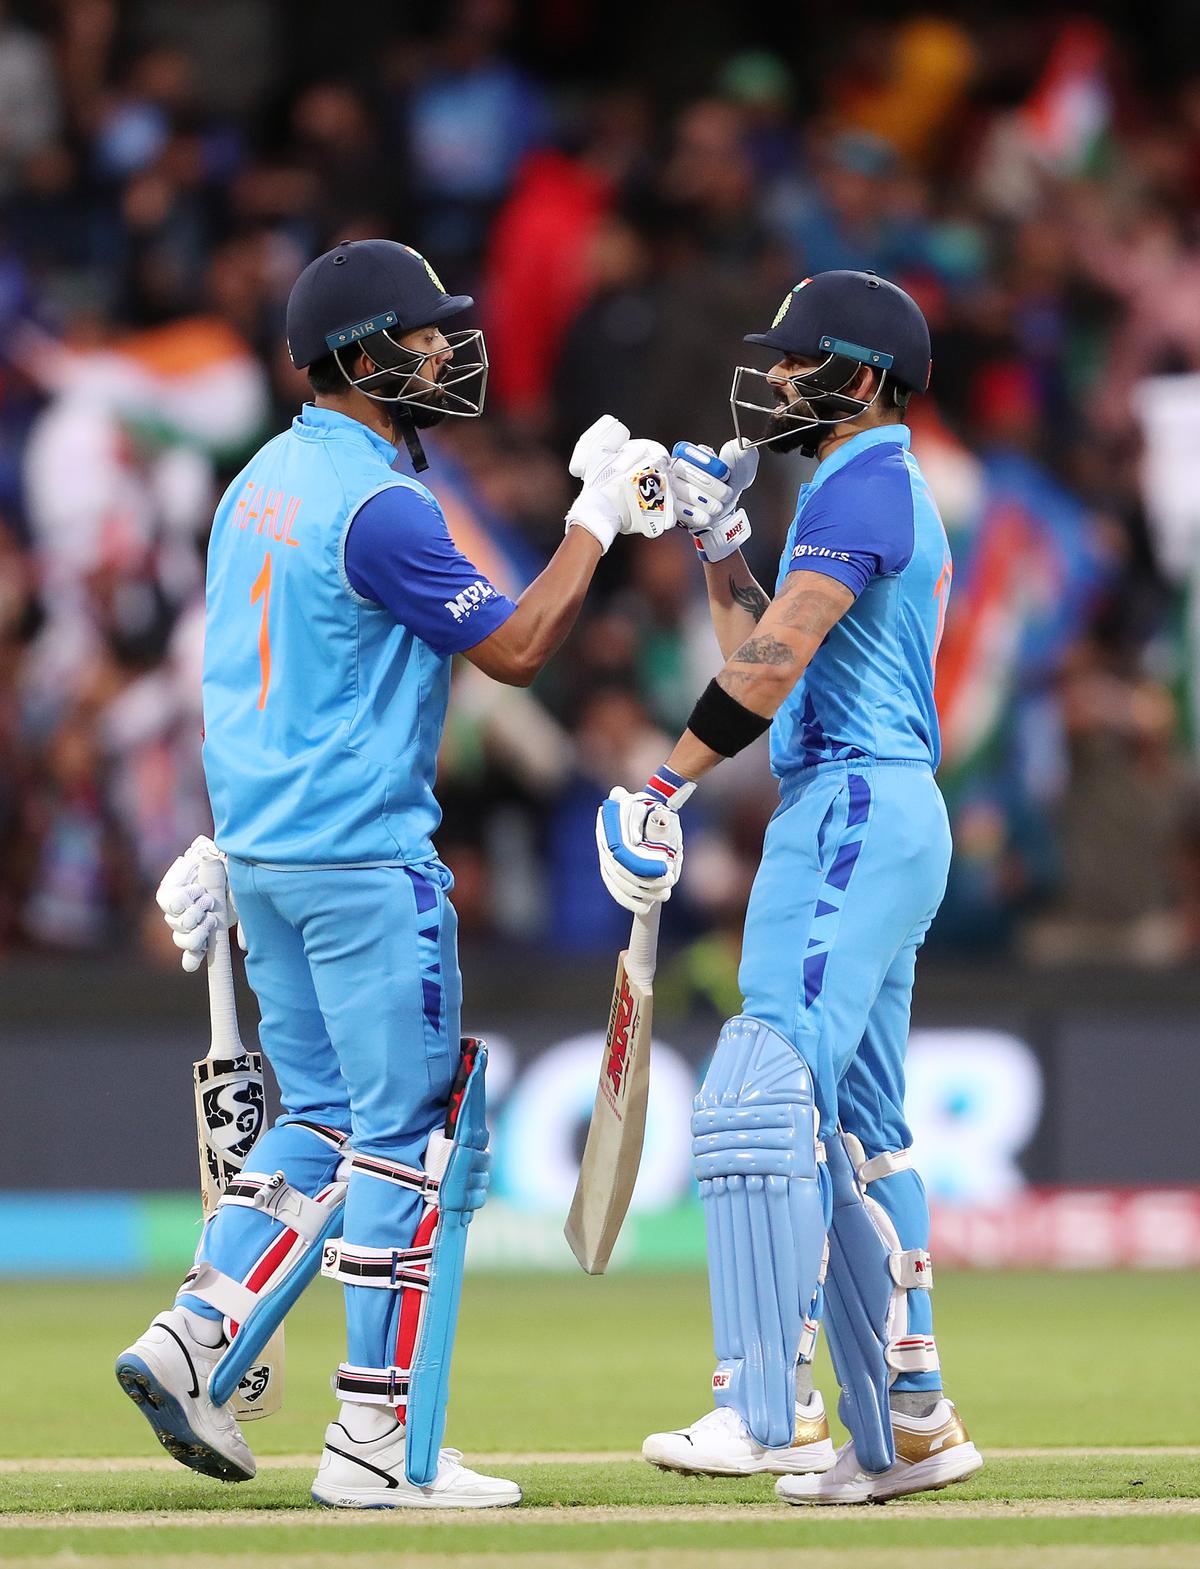 K. L. Rahul and Virat Kohli of India during the ICC Men’s T20 World Cup match between India and Bangladesh at Adelaide Oval on November 02, 2022 in Adelaide, Australia